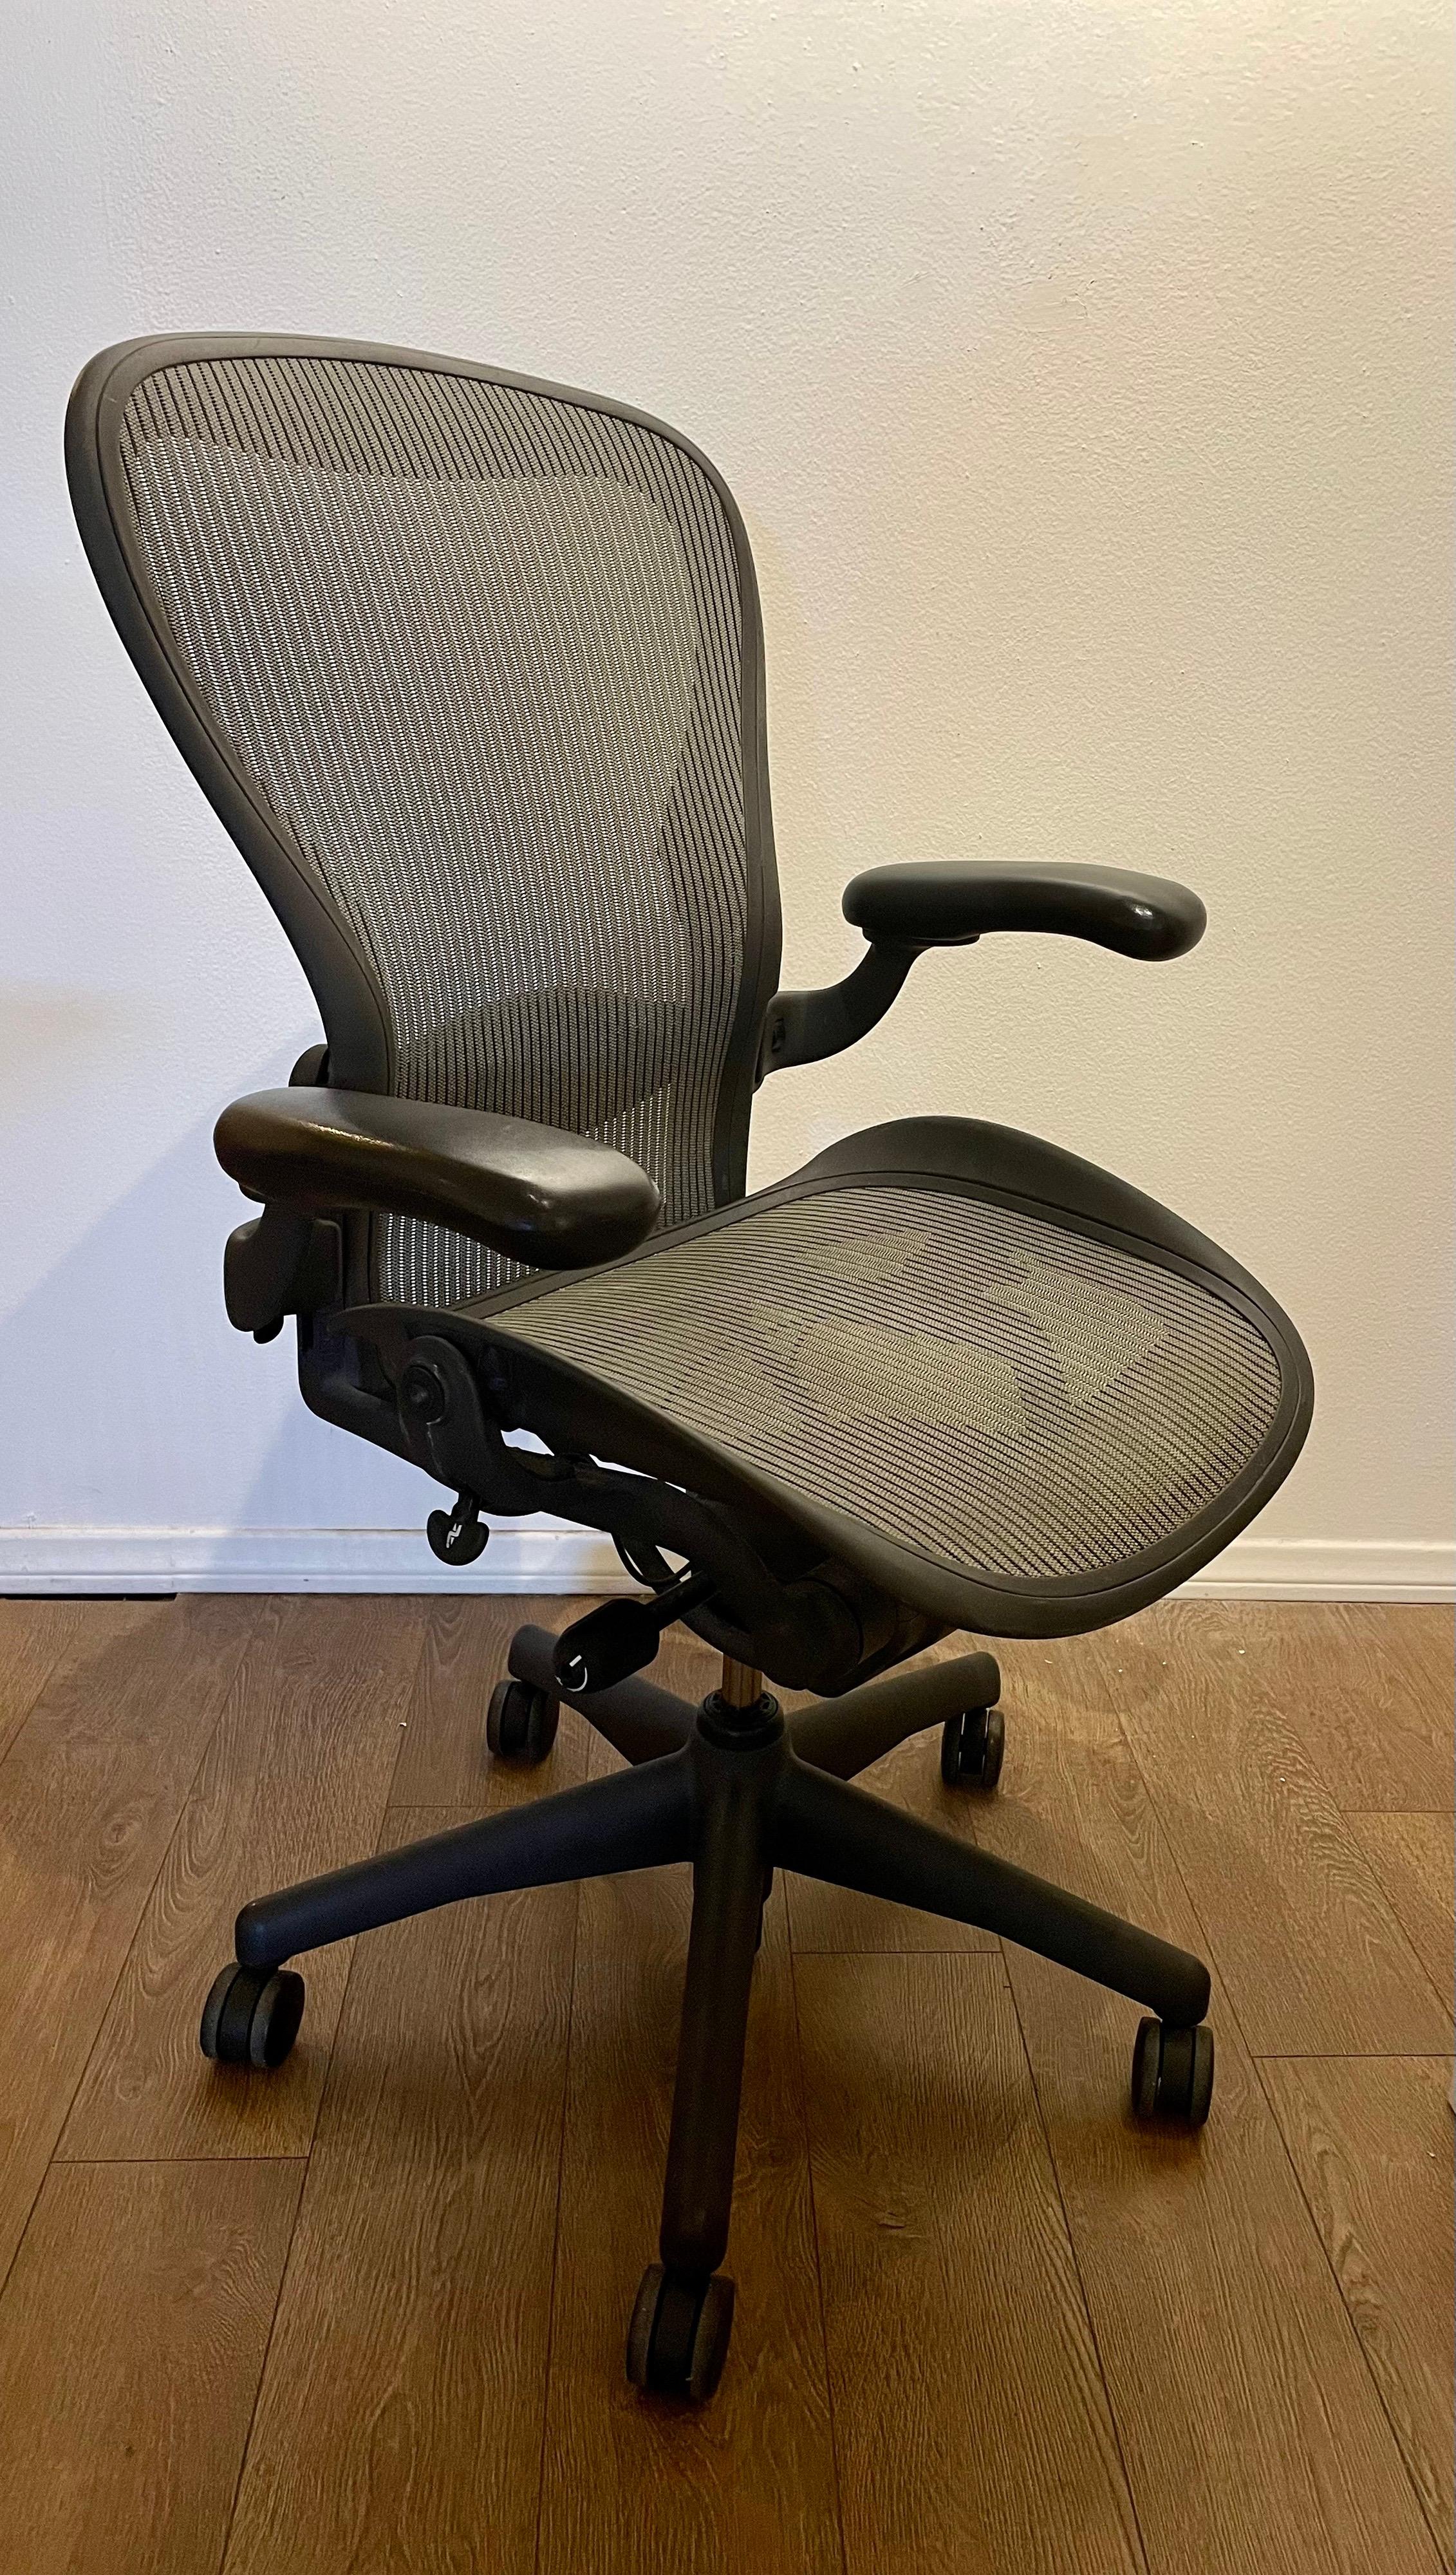 Adjustable Herman Miller Aeron chair with adjustable arms and lumbar support, great clean condition very light use.